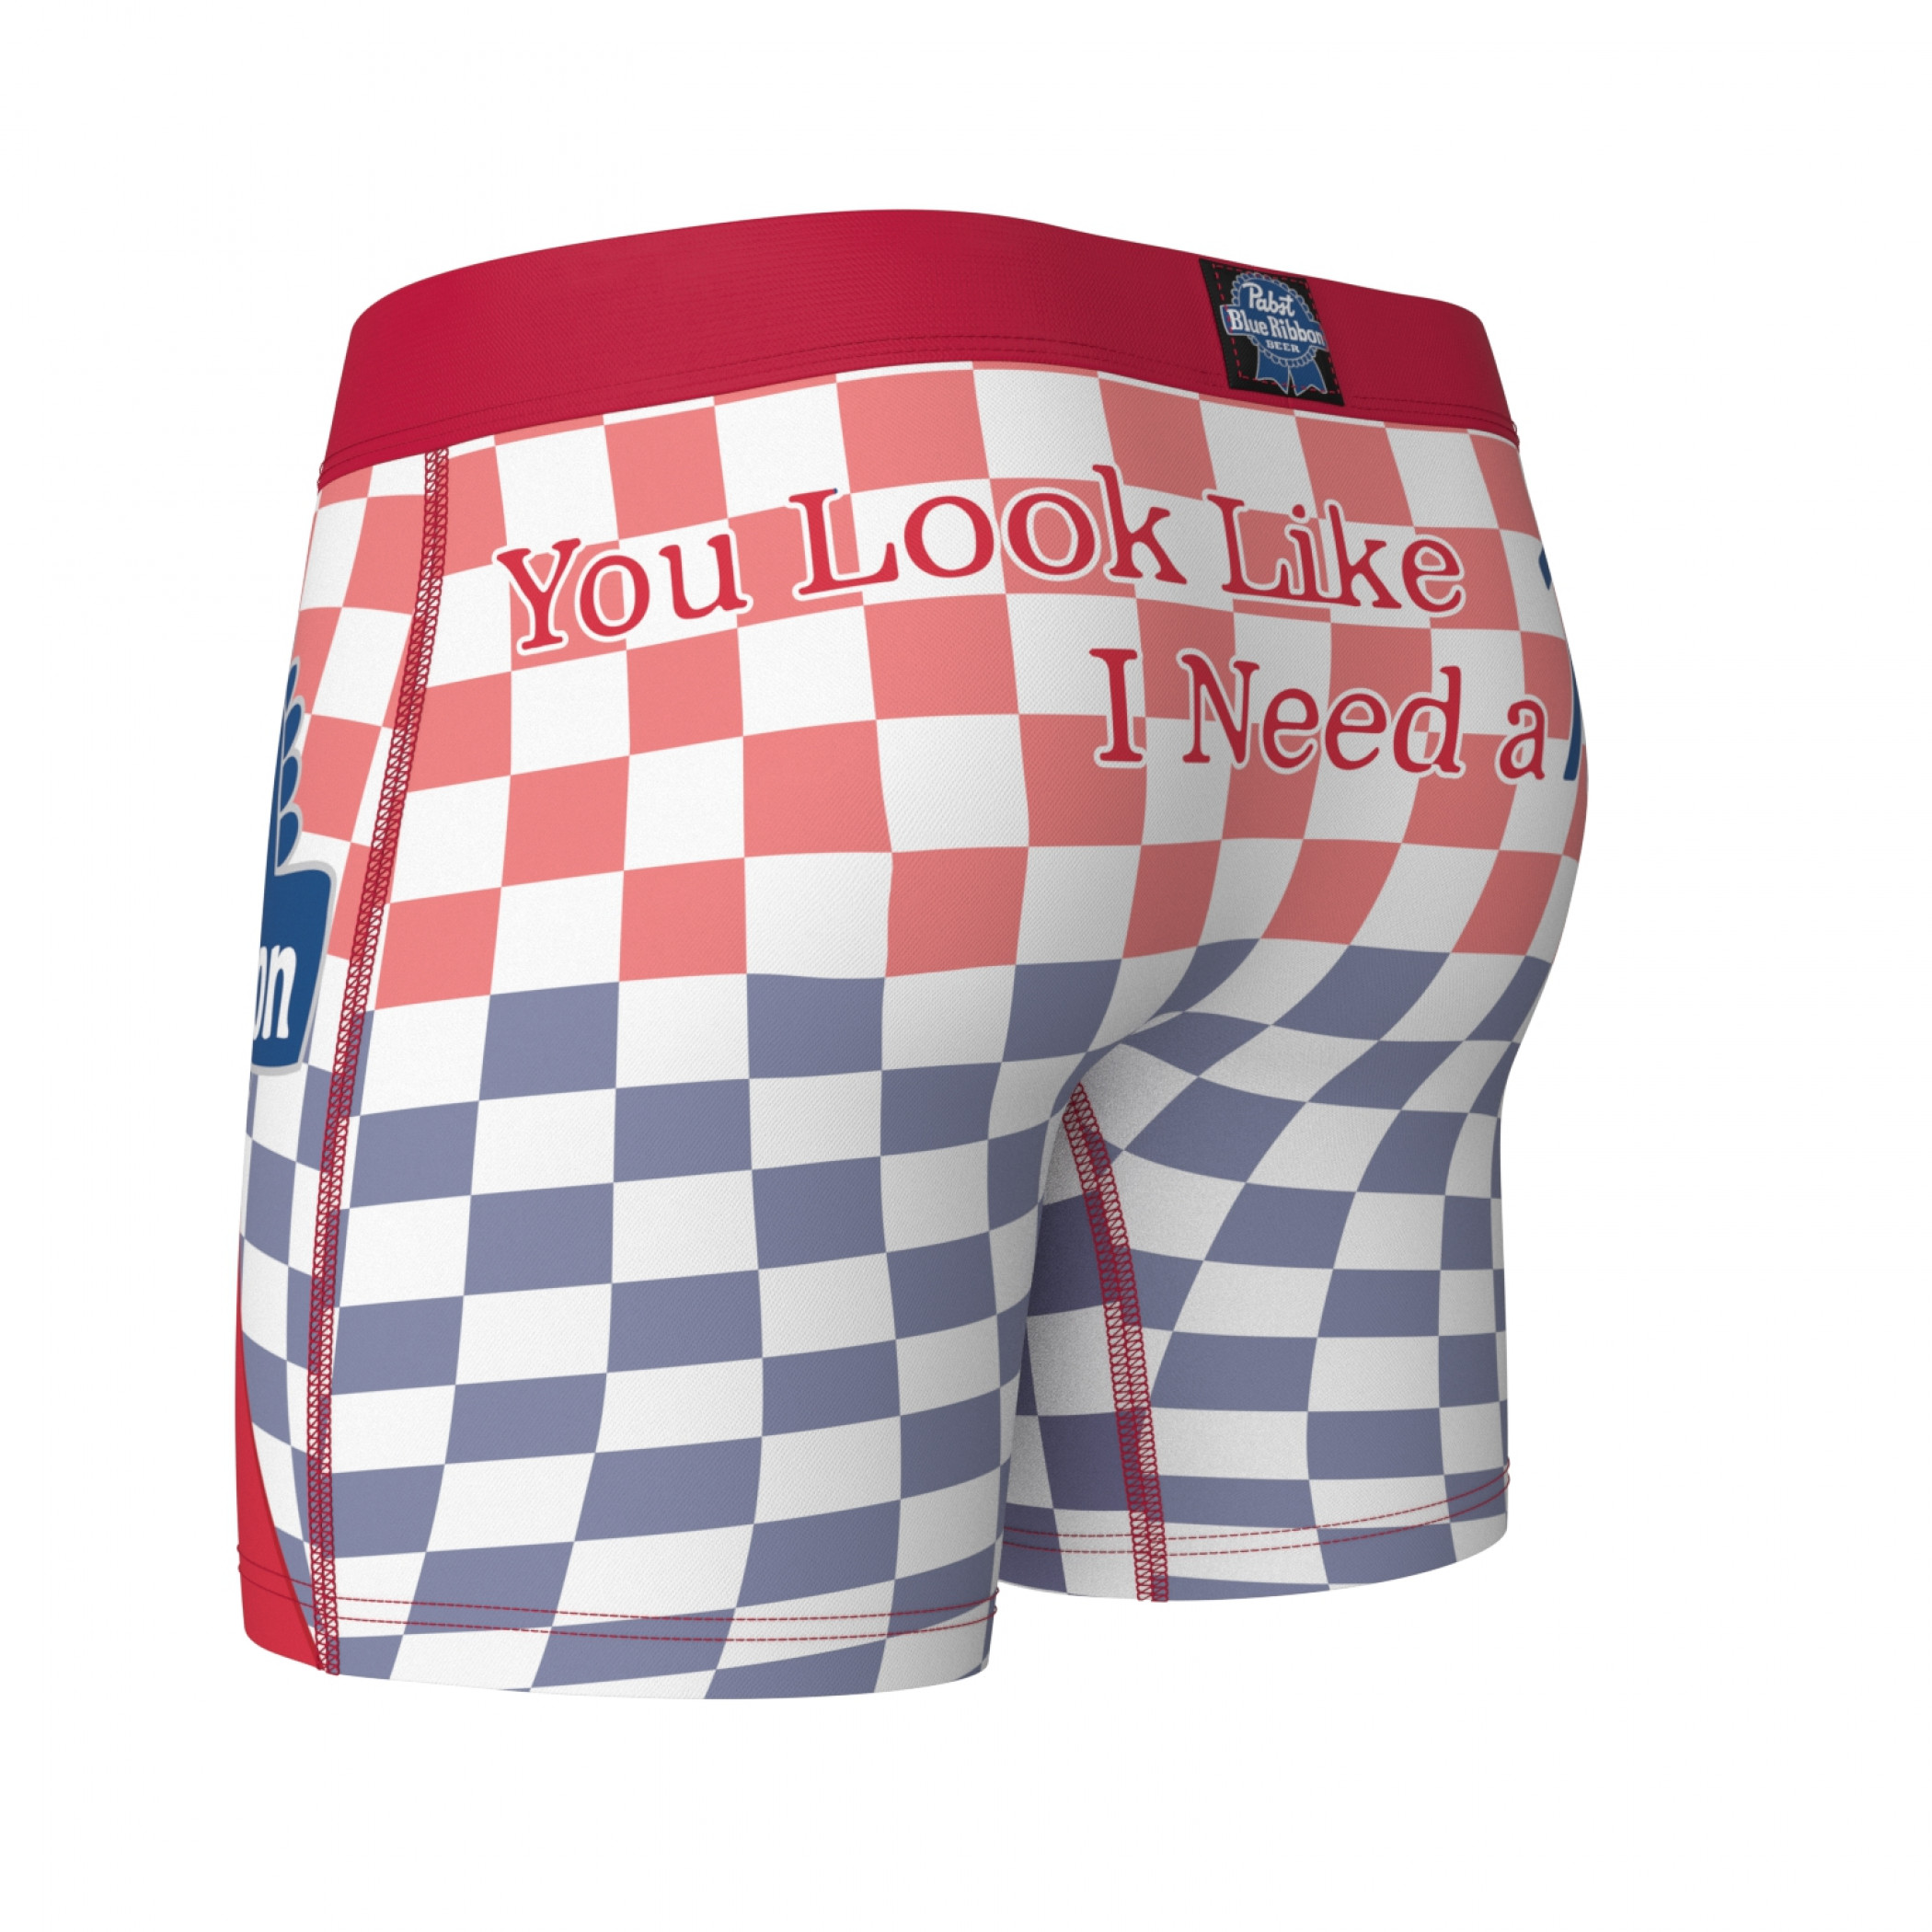 Pabst Blue Ribbon Beer Man Swag Boxer Briefs in a Can